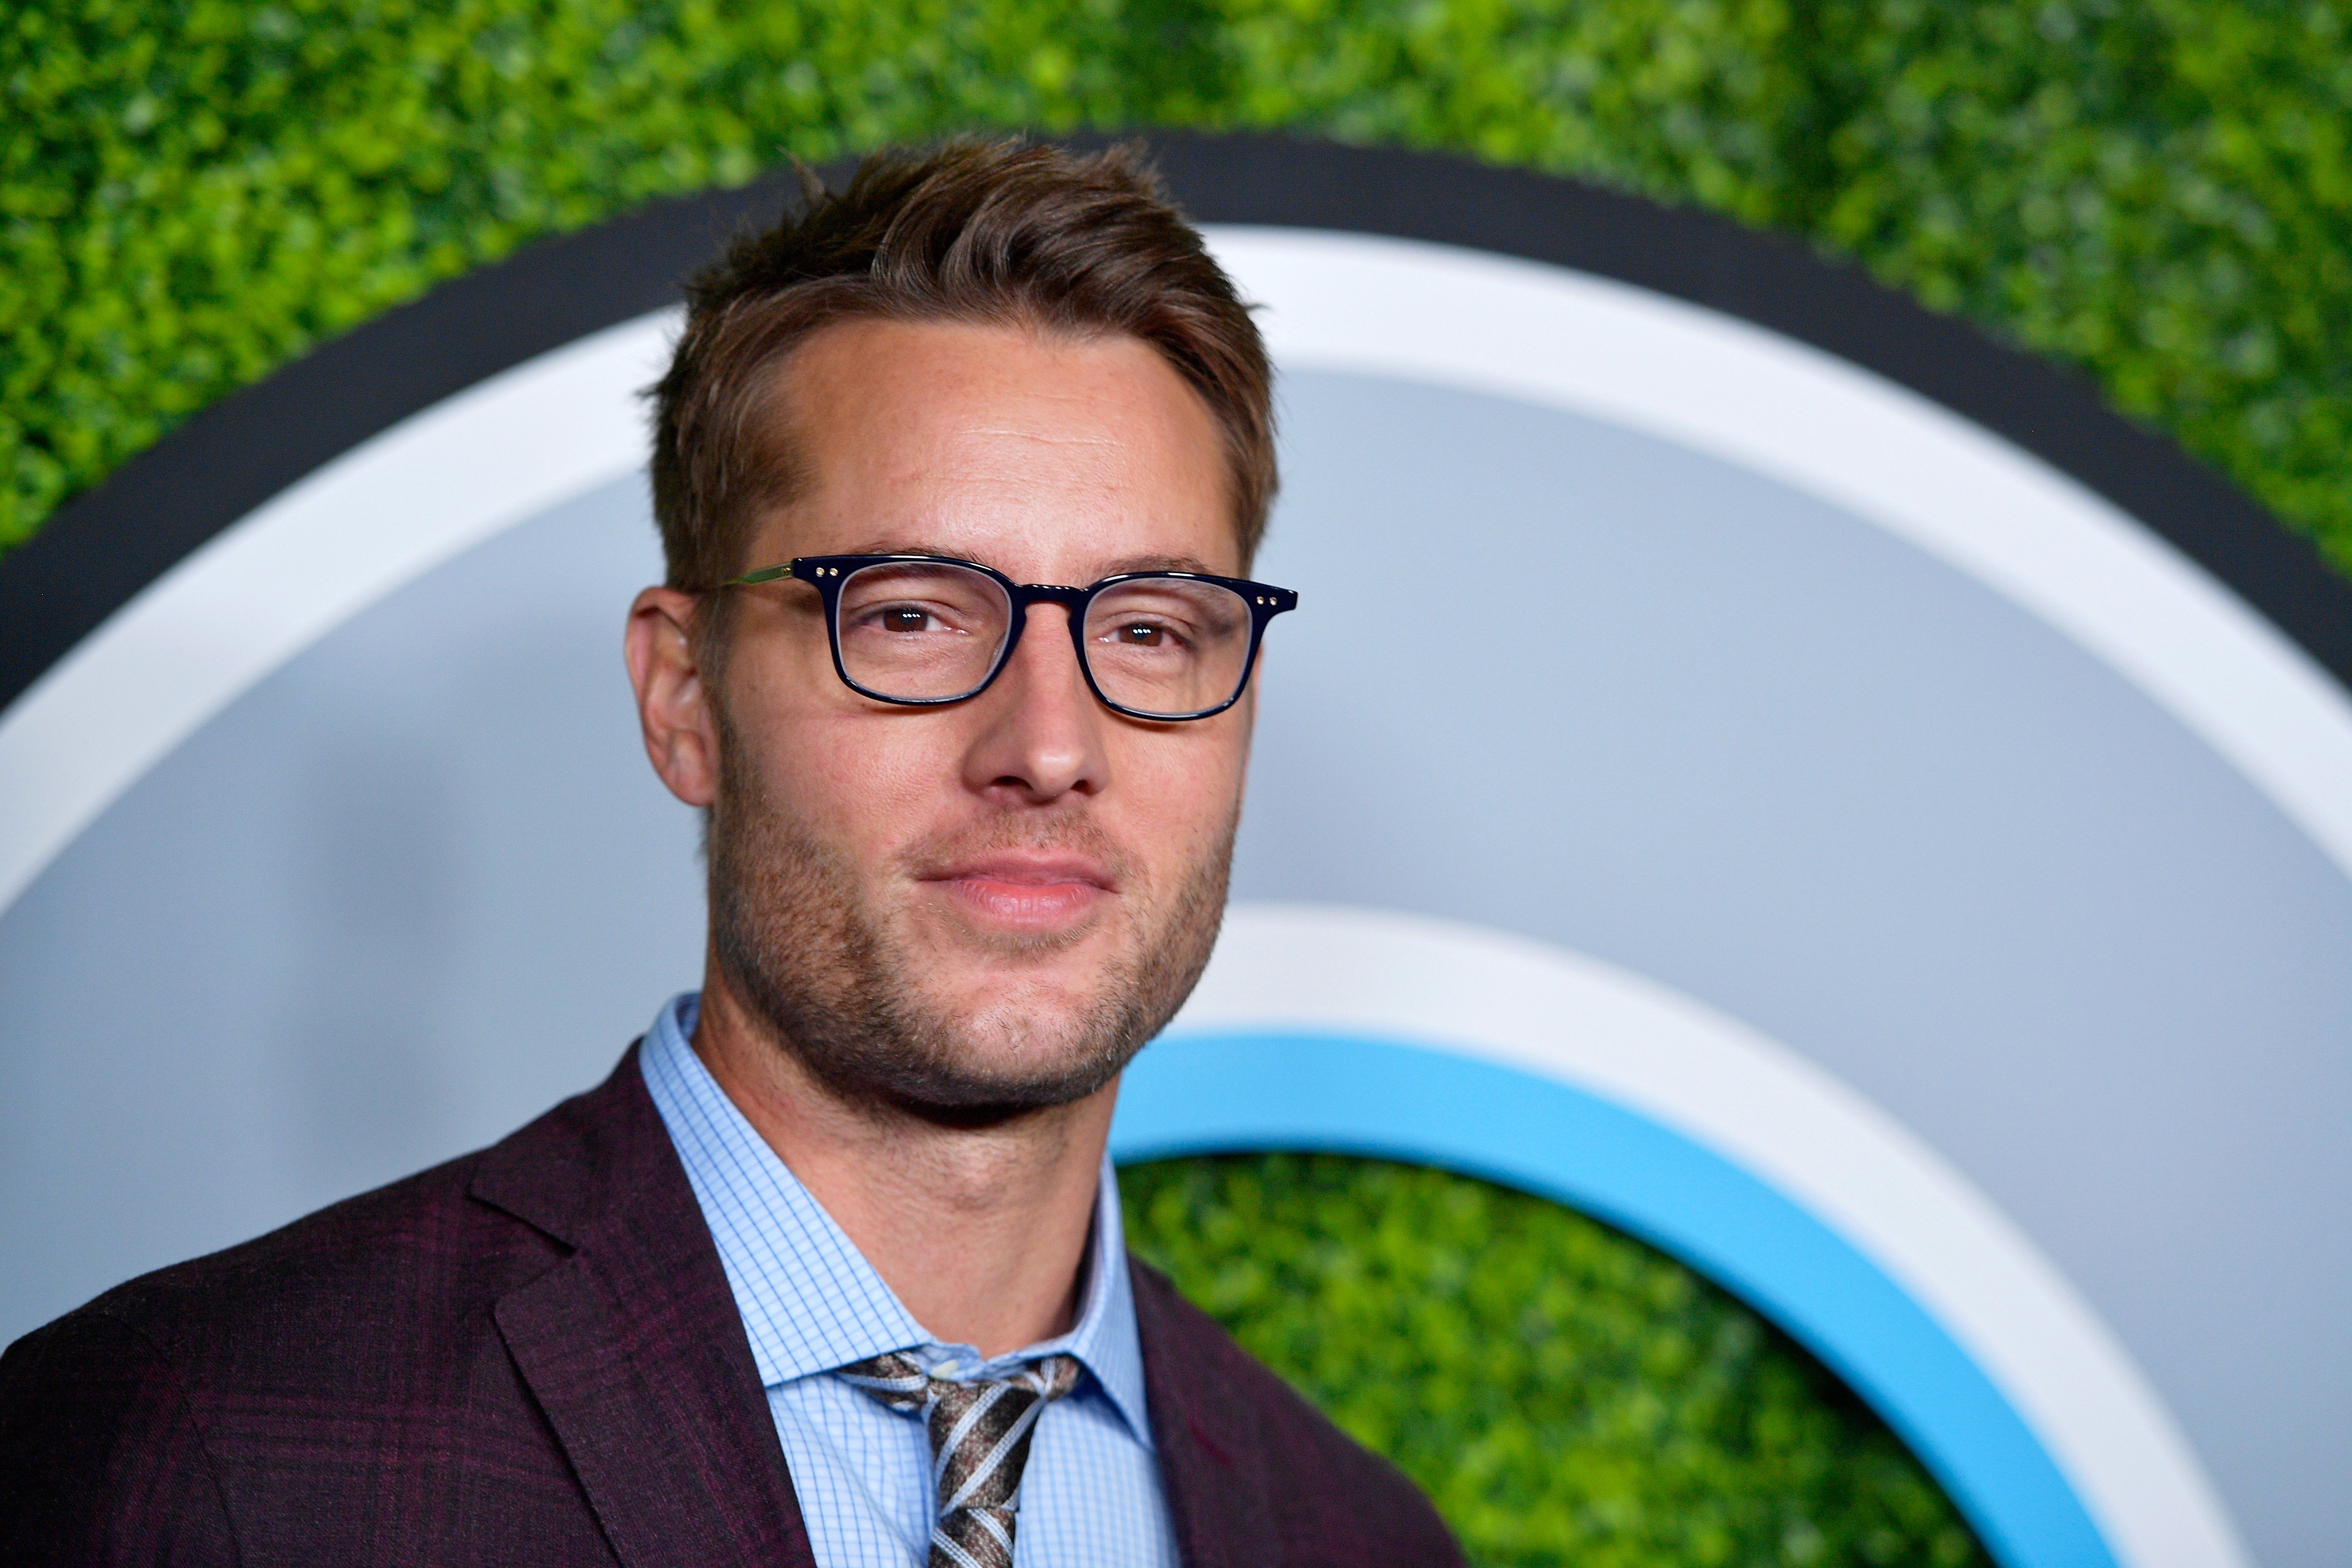 Justin Hartley attends the 2017 GQ Men of the Year party on December 7, 2017, in Los Angeles, California. | Source: Getty Images.